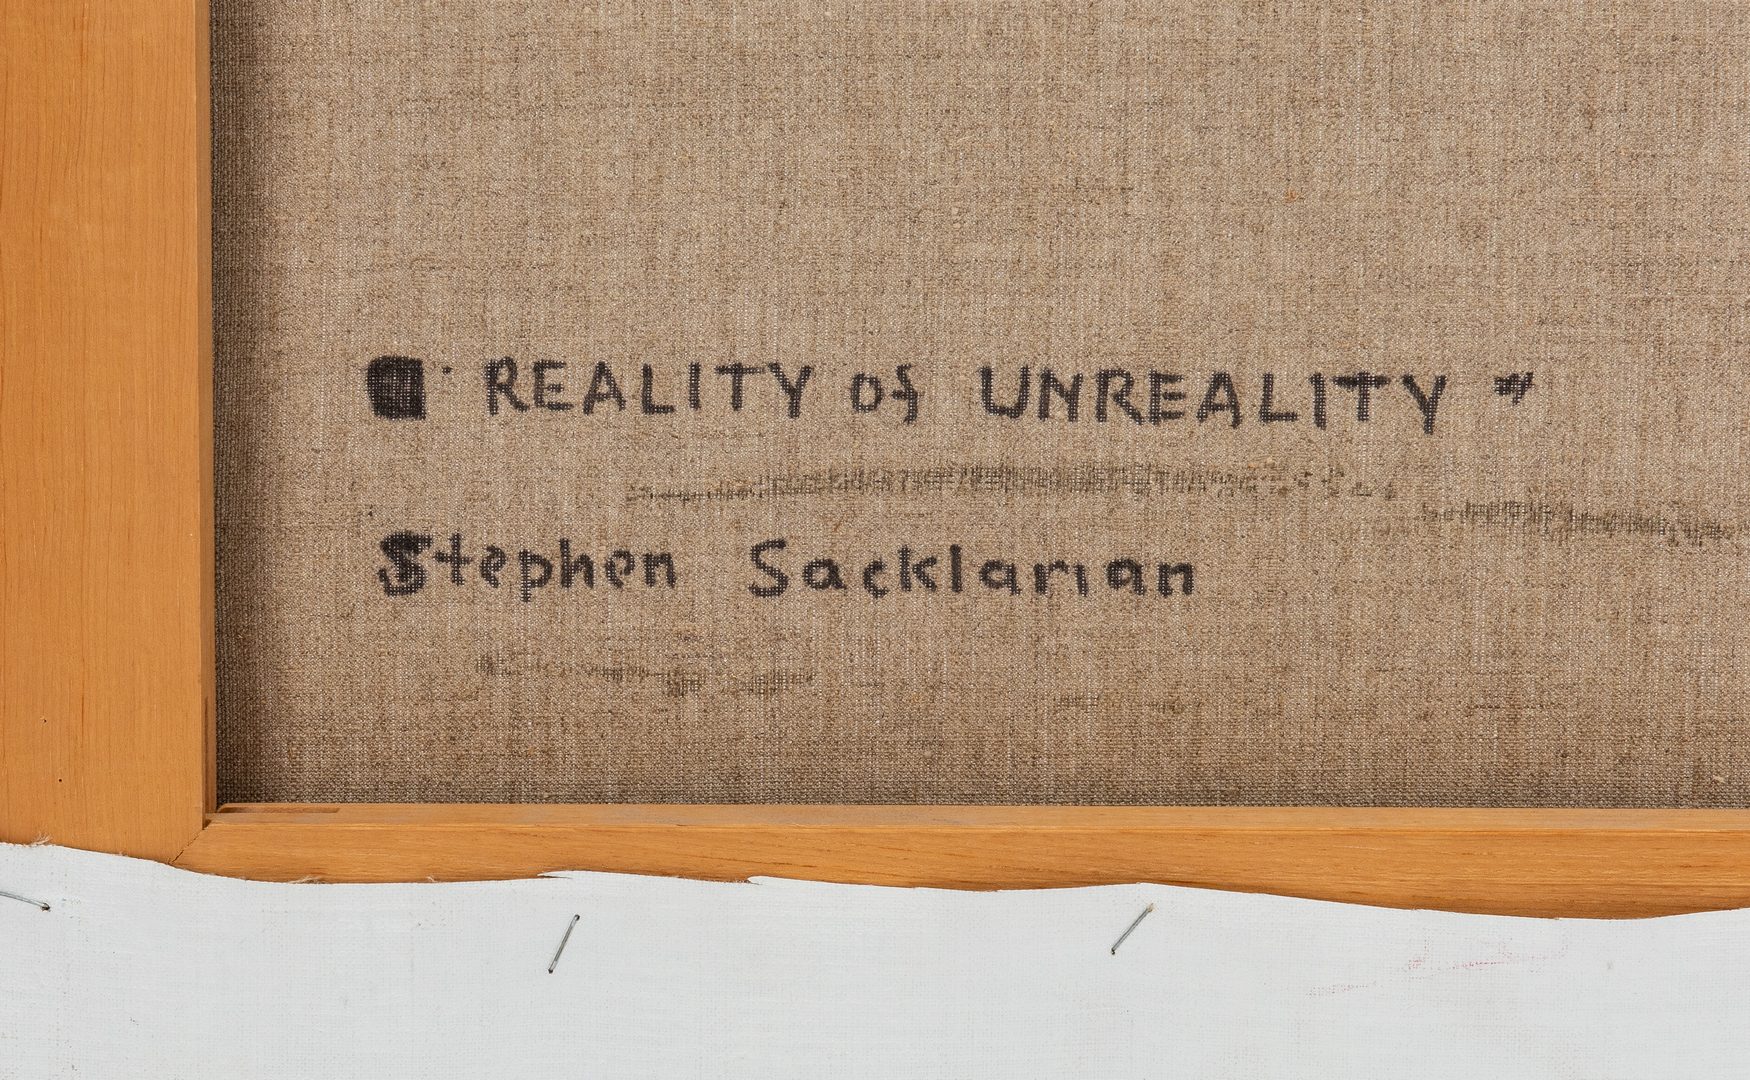 Lot 236: Reality of Unreality (E-2) by Sacklarian